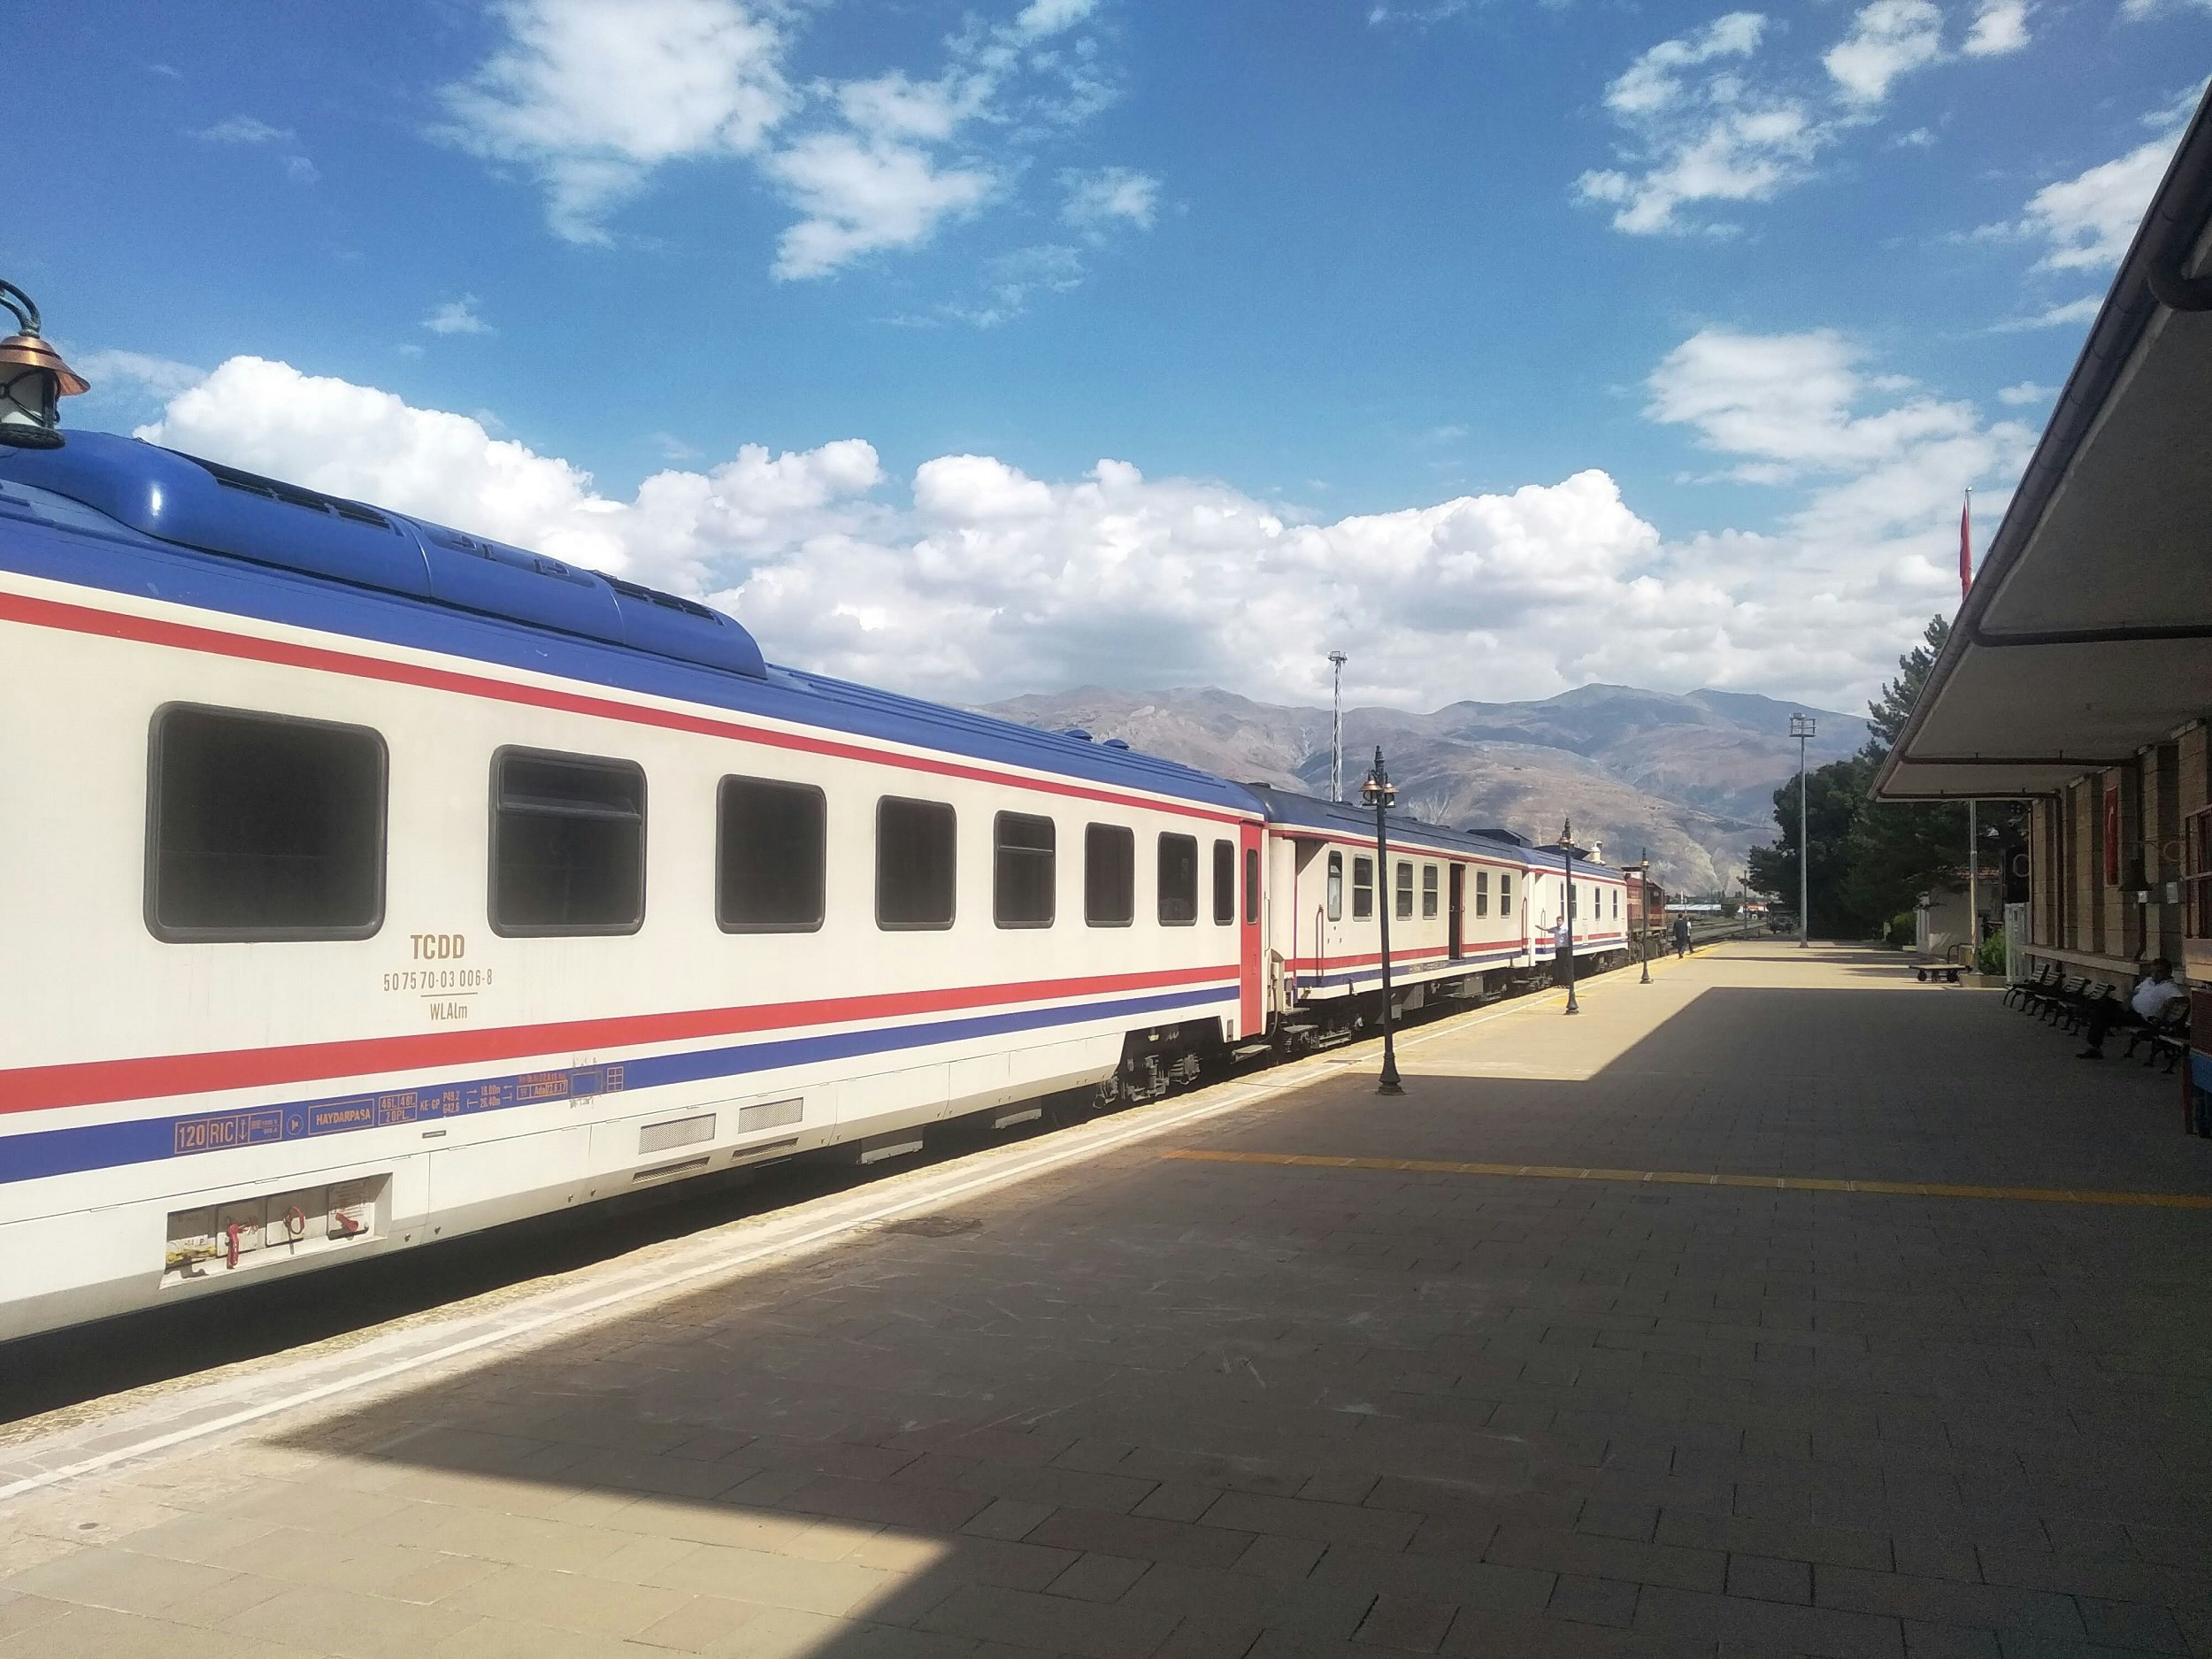 Three carriages of a train standing at a station platform. Each carriage is white with two stripes in red and blue running the length of the carriage below the windows. There are hills in the background